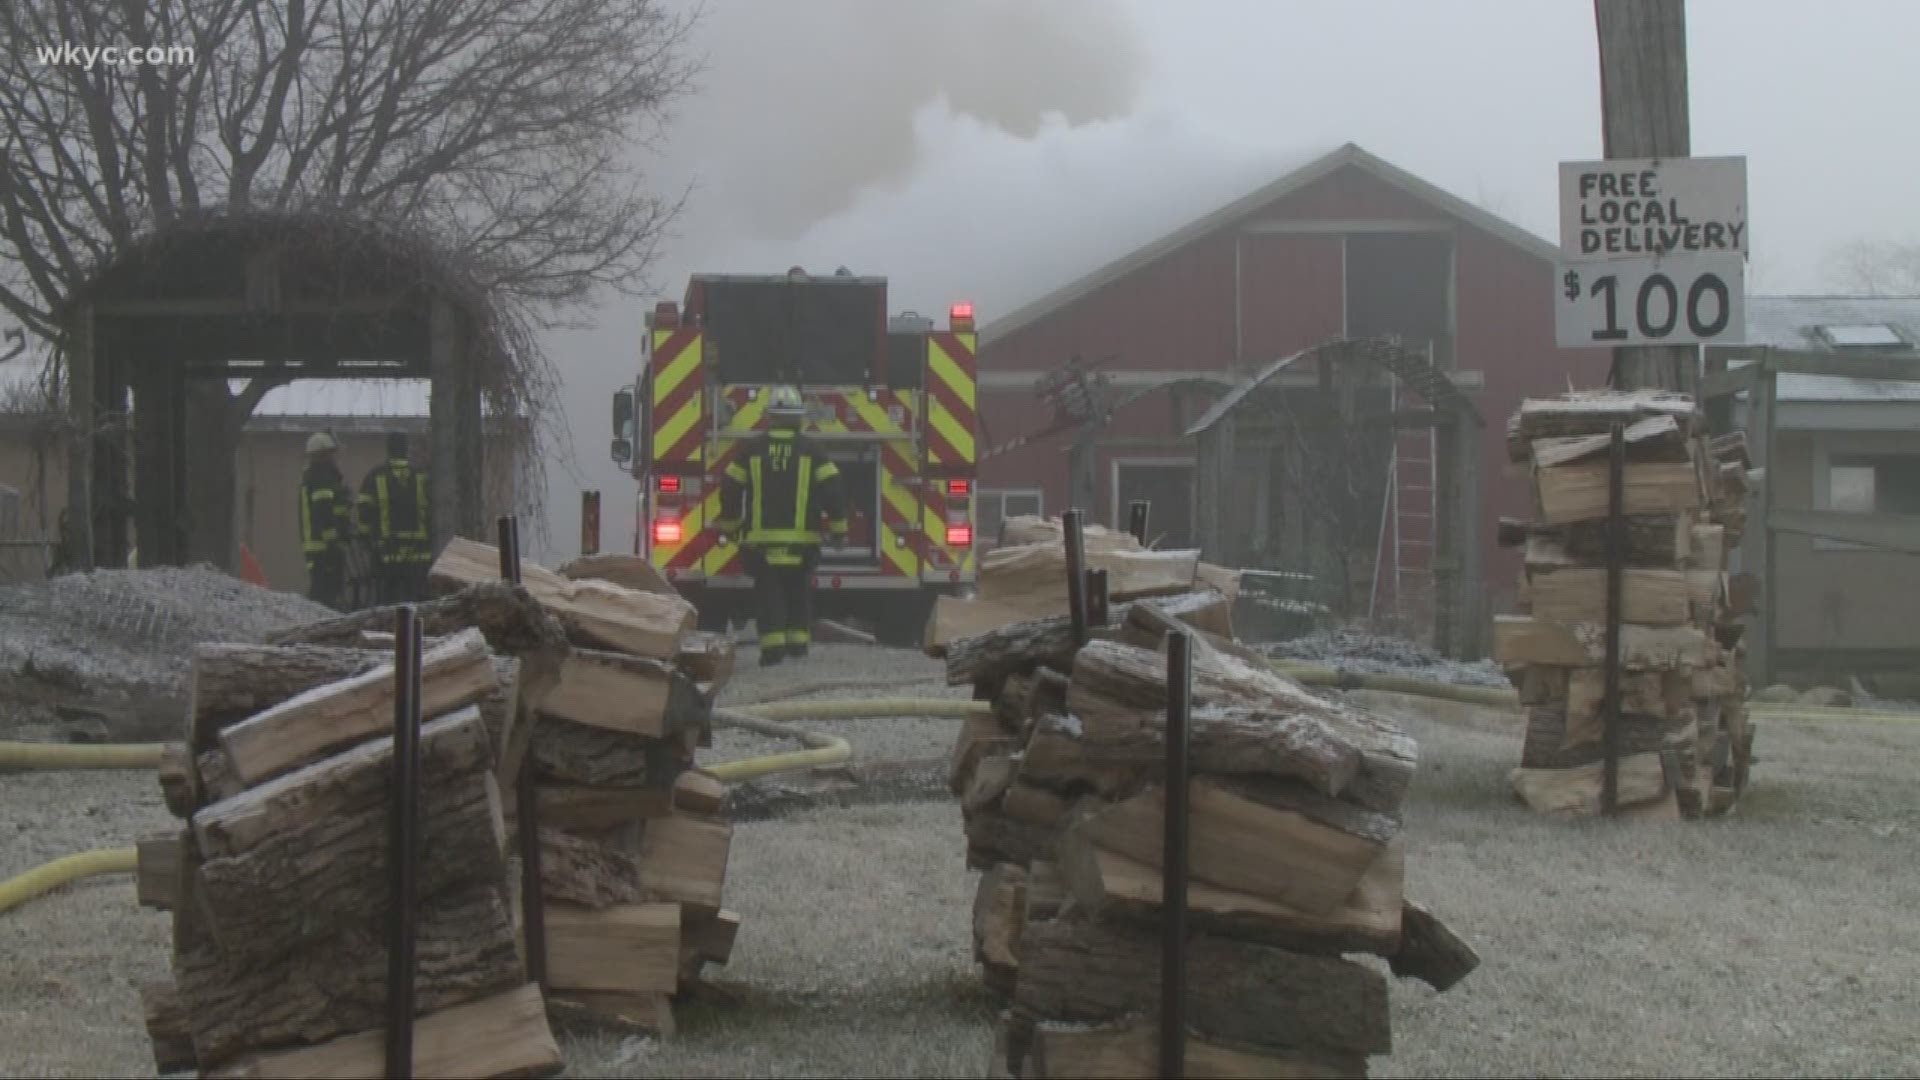 Fire chief says heat lamps to blame in Medina barn fire